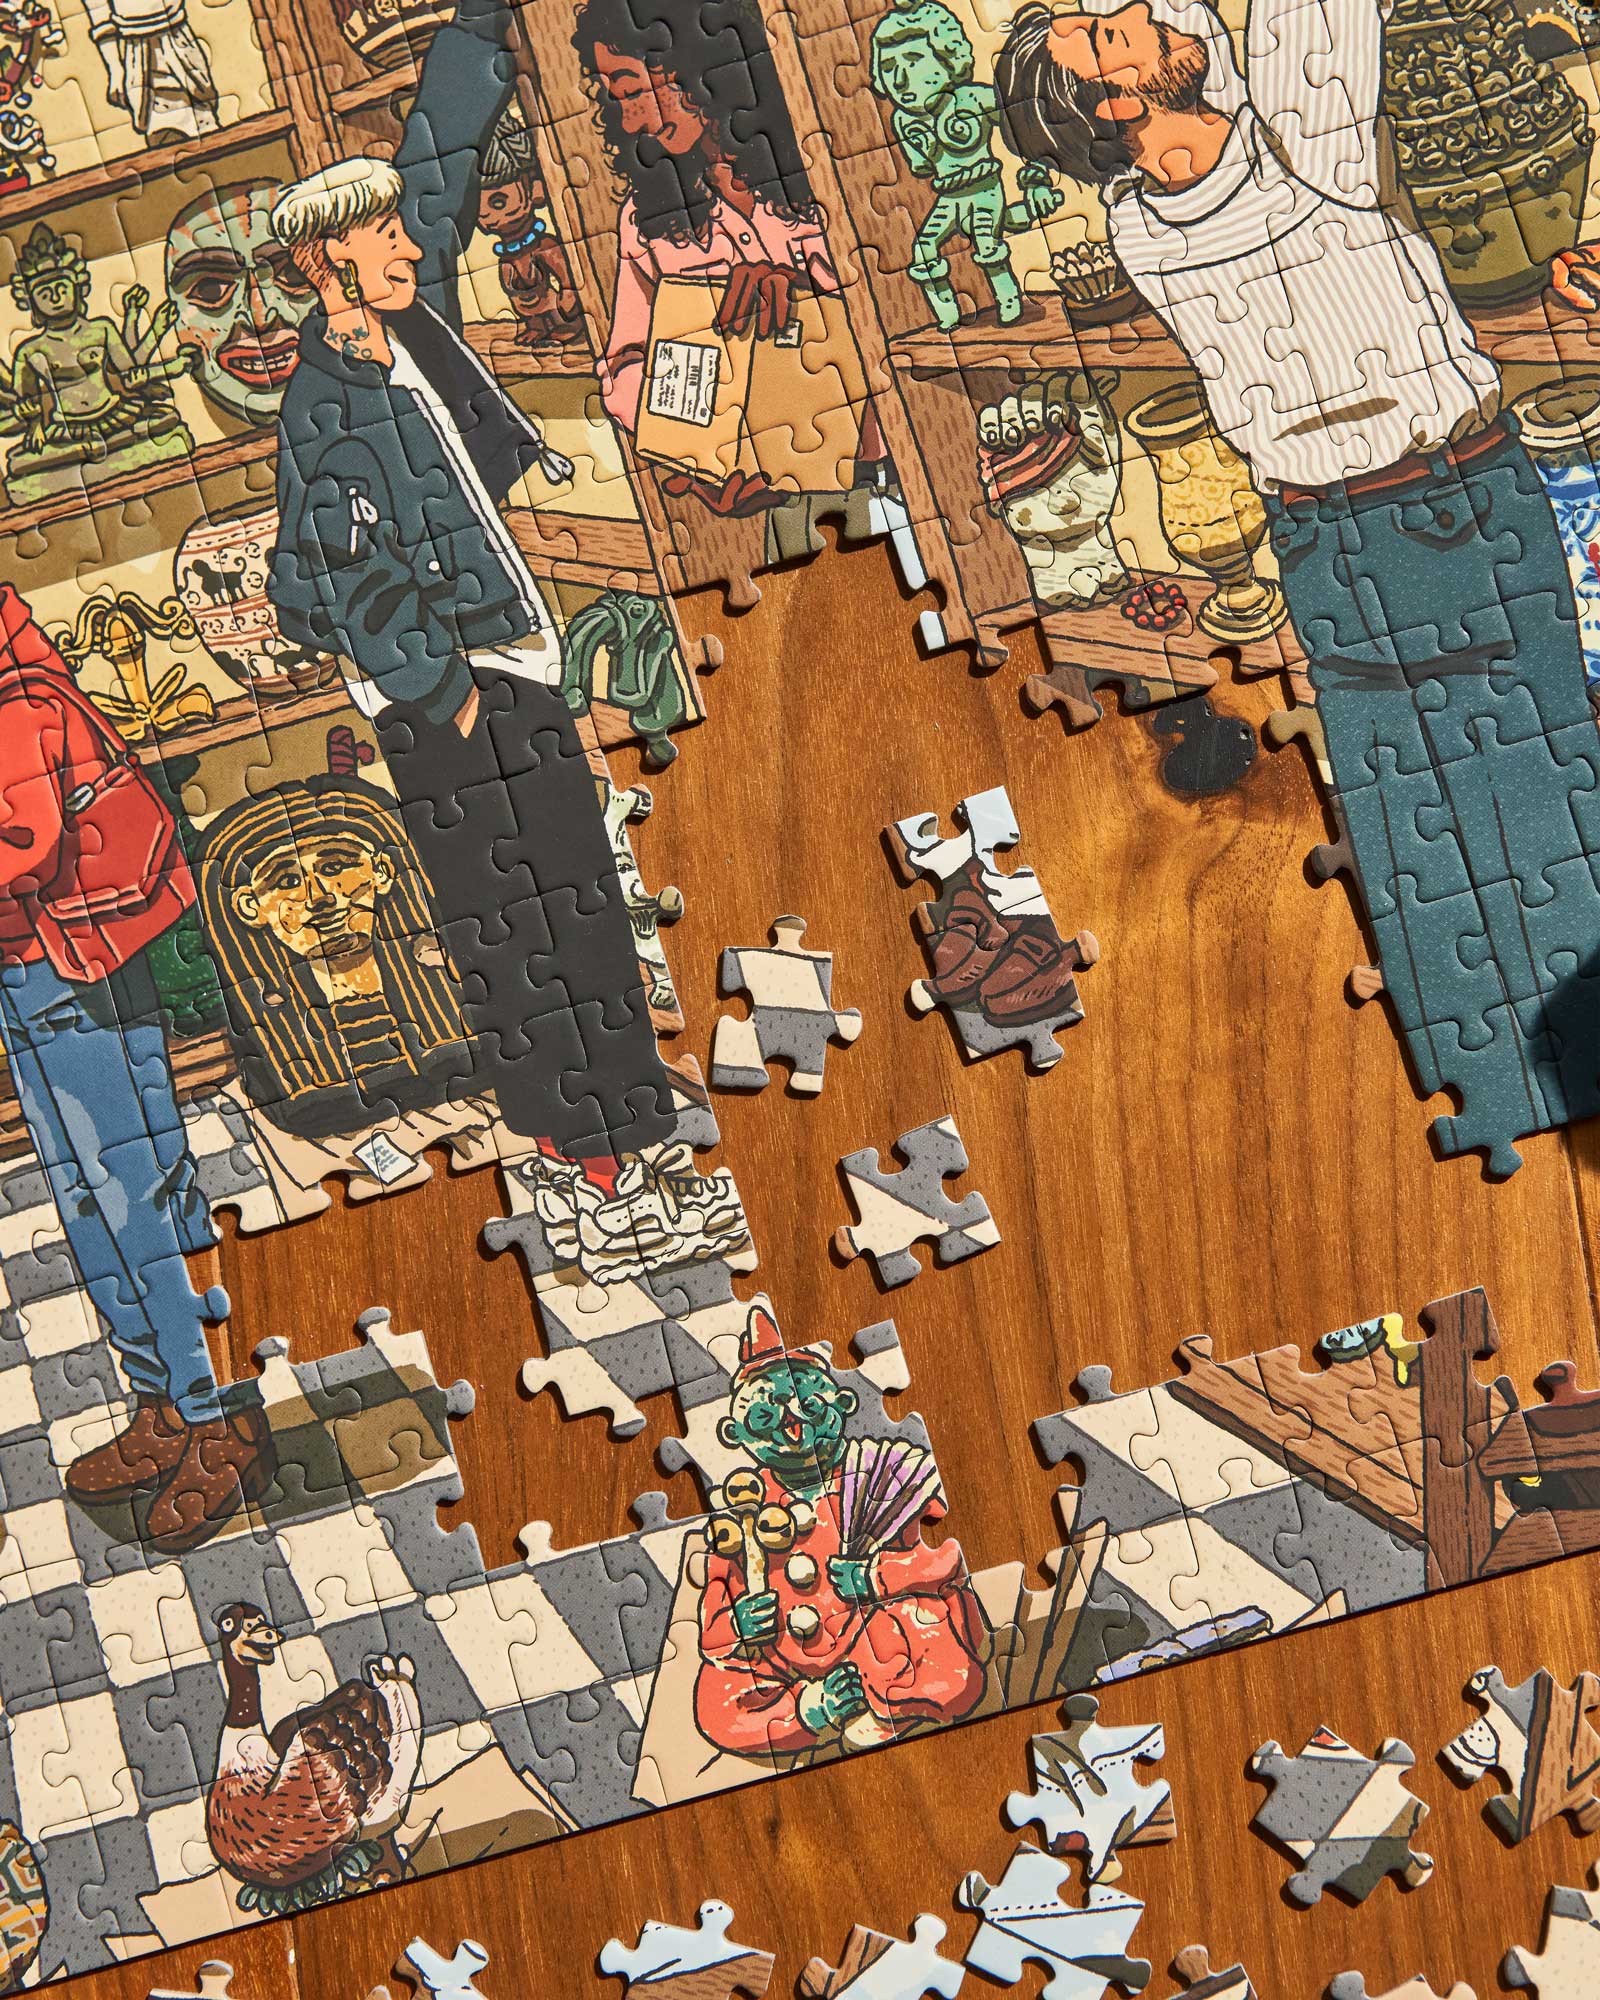 Ten households assemble a 40,000-piece puzzle in self-isolation